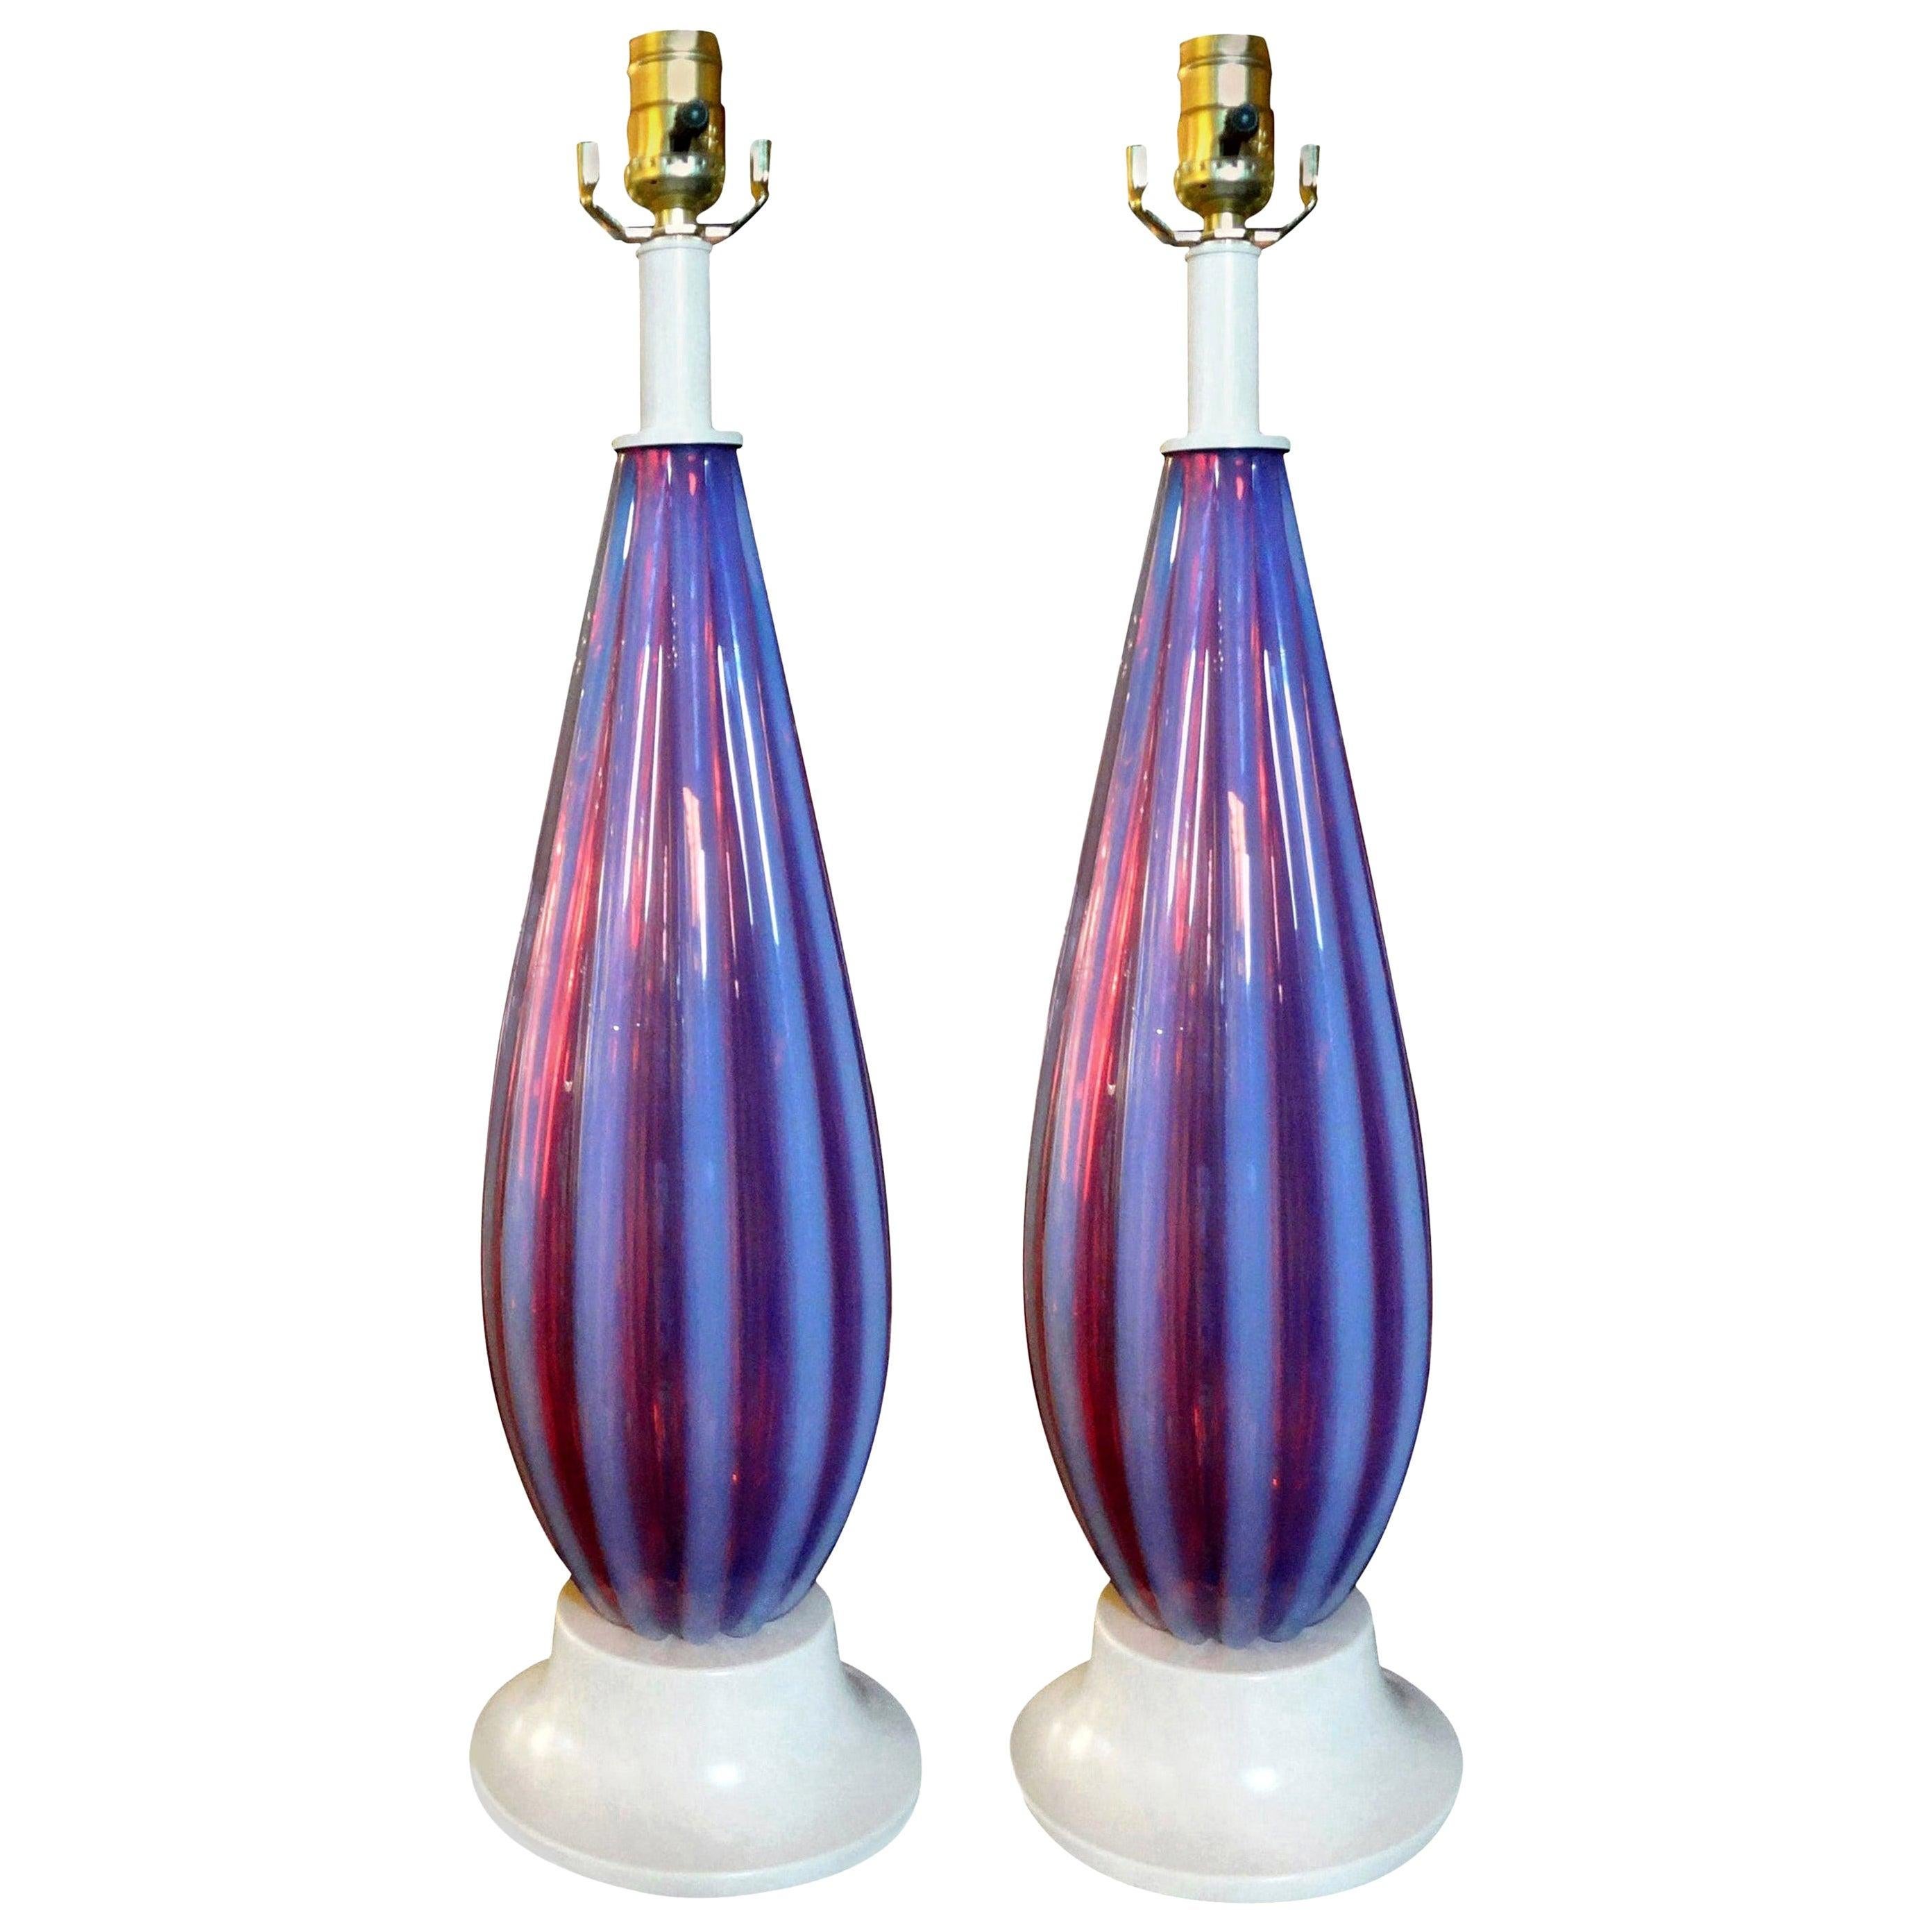 Pair of Opalescent Murano glass lamps attributed to Seguso. Stunning pair of Italian mid-century opaline Murano lamps newly wired for US market. Fabulous color! This pair of Hollywood Regency table lamps are attributed to Seguso.